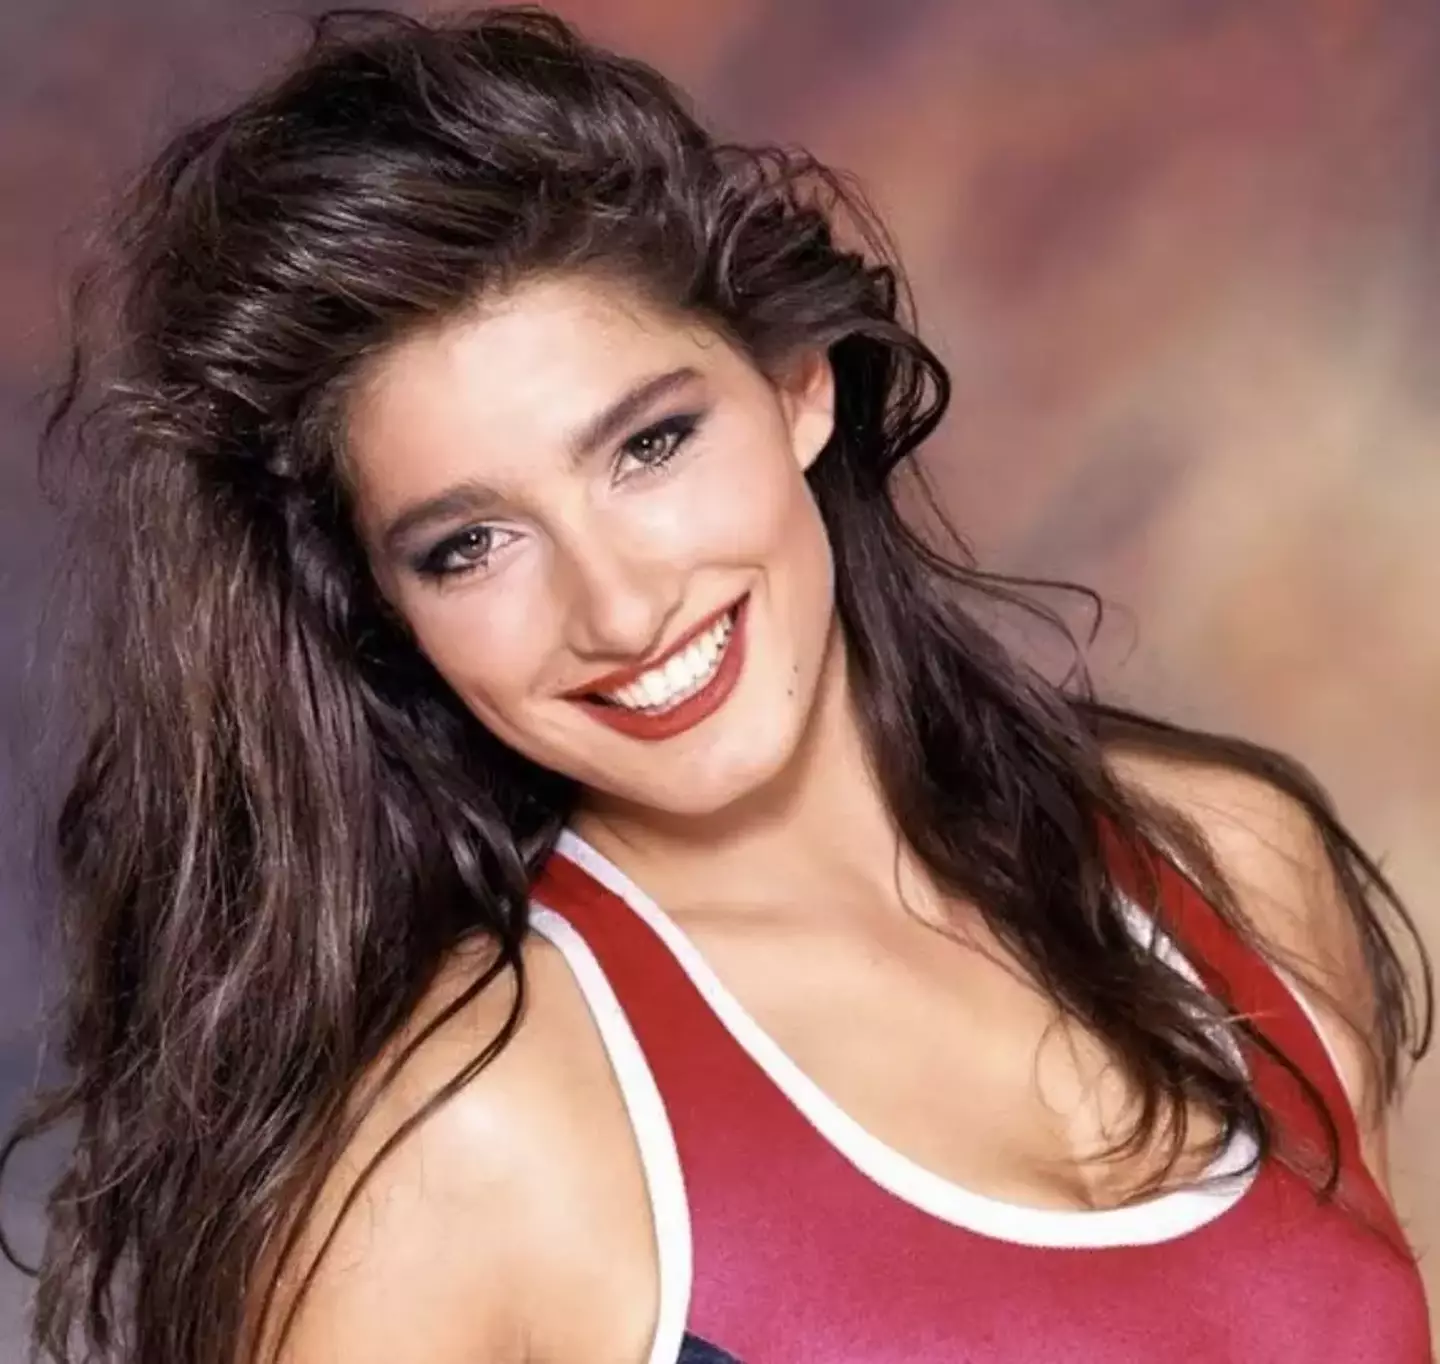 Diane Youdale starred as Jet in iconic ITV 90s series Gladiators.